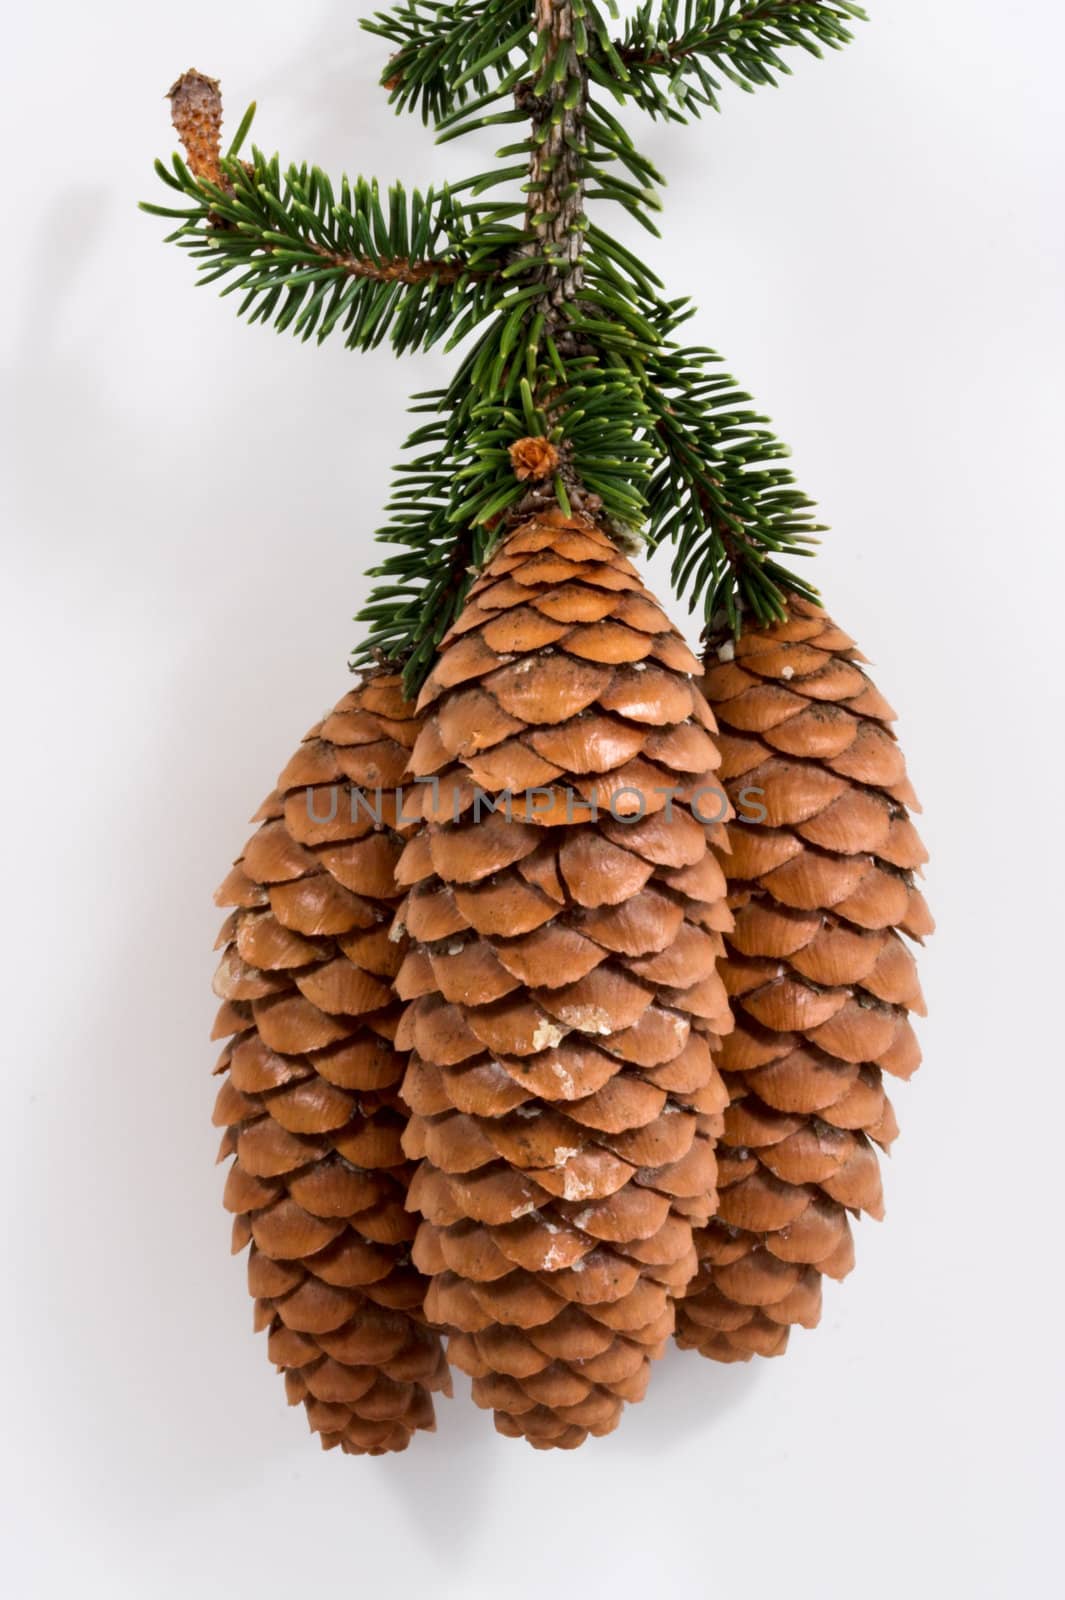 Three pine cones with white background